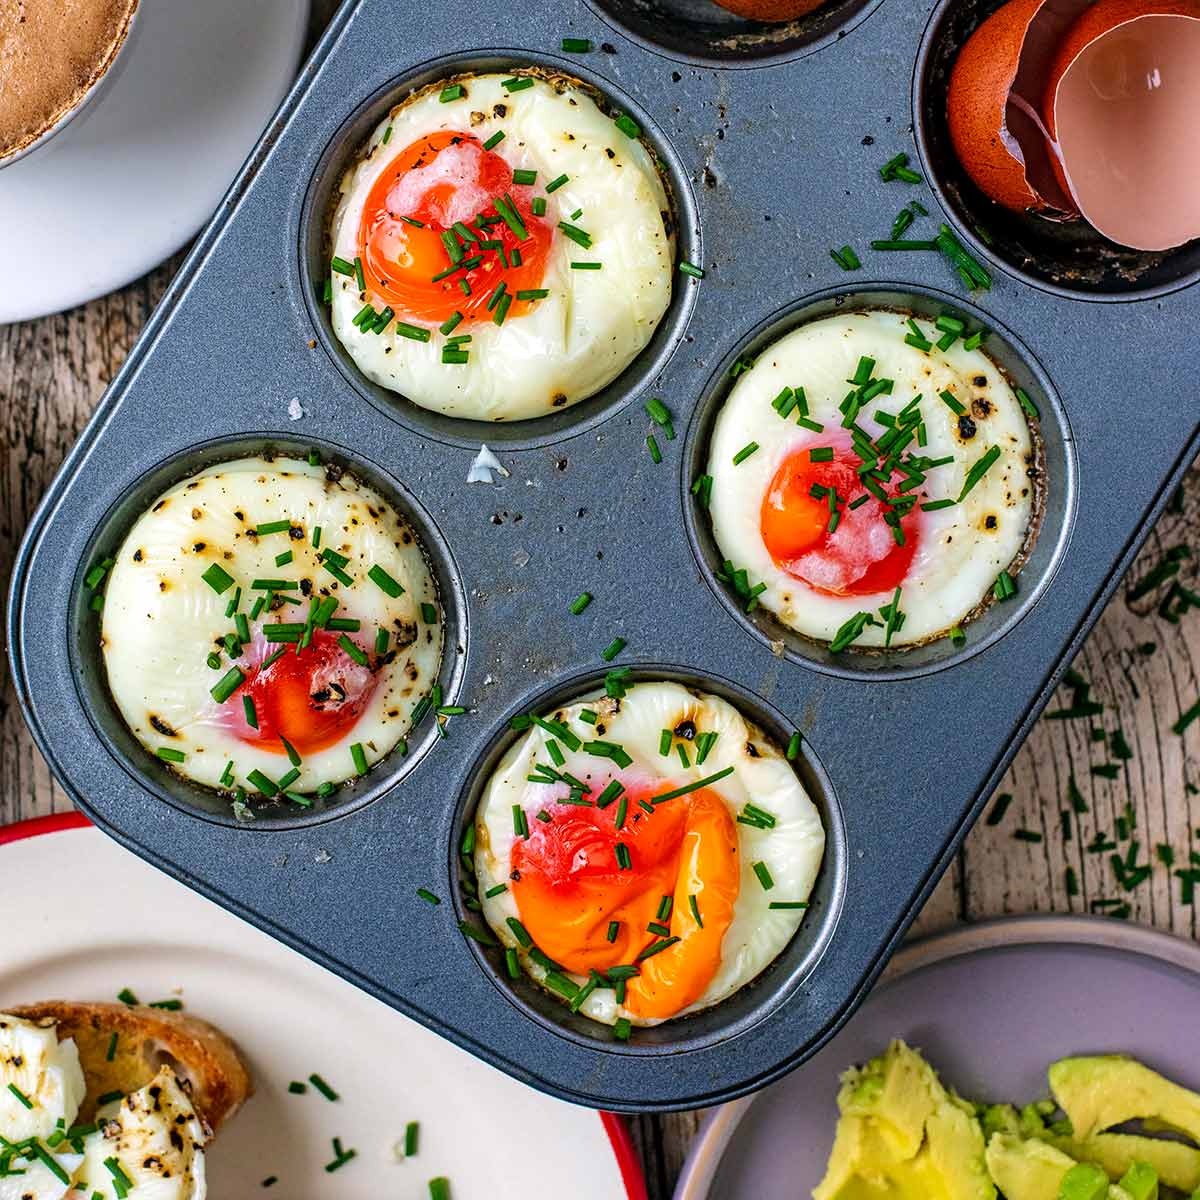 https://hungryhealthyhappy.com/wp-content/uploads/2021/11/Easy-Oven-Baked-Eggs-featured.jpg